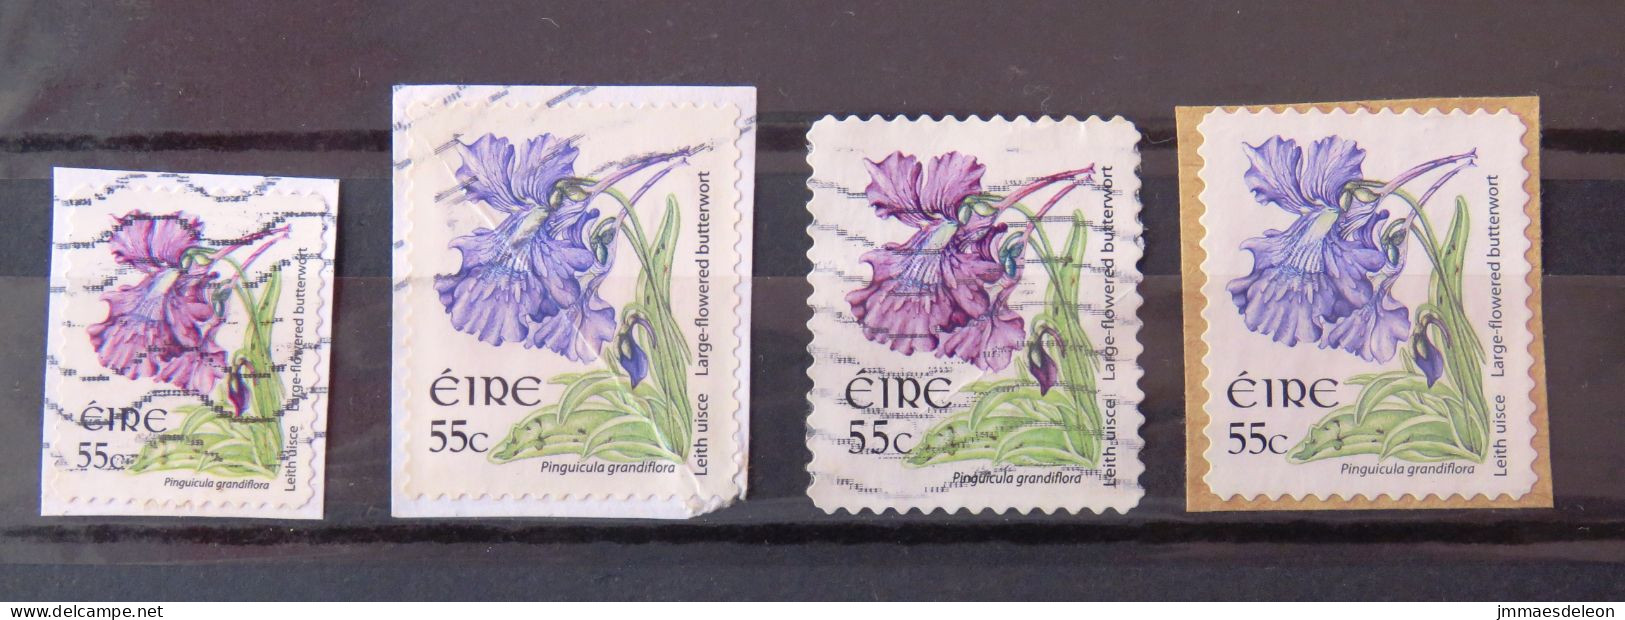 Ireland 2007 Flowers - 3 Different, 1 Smeller Sie, 2 Different Perforations, One Different Color - Usati